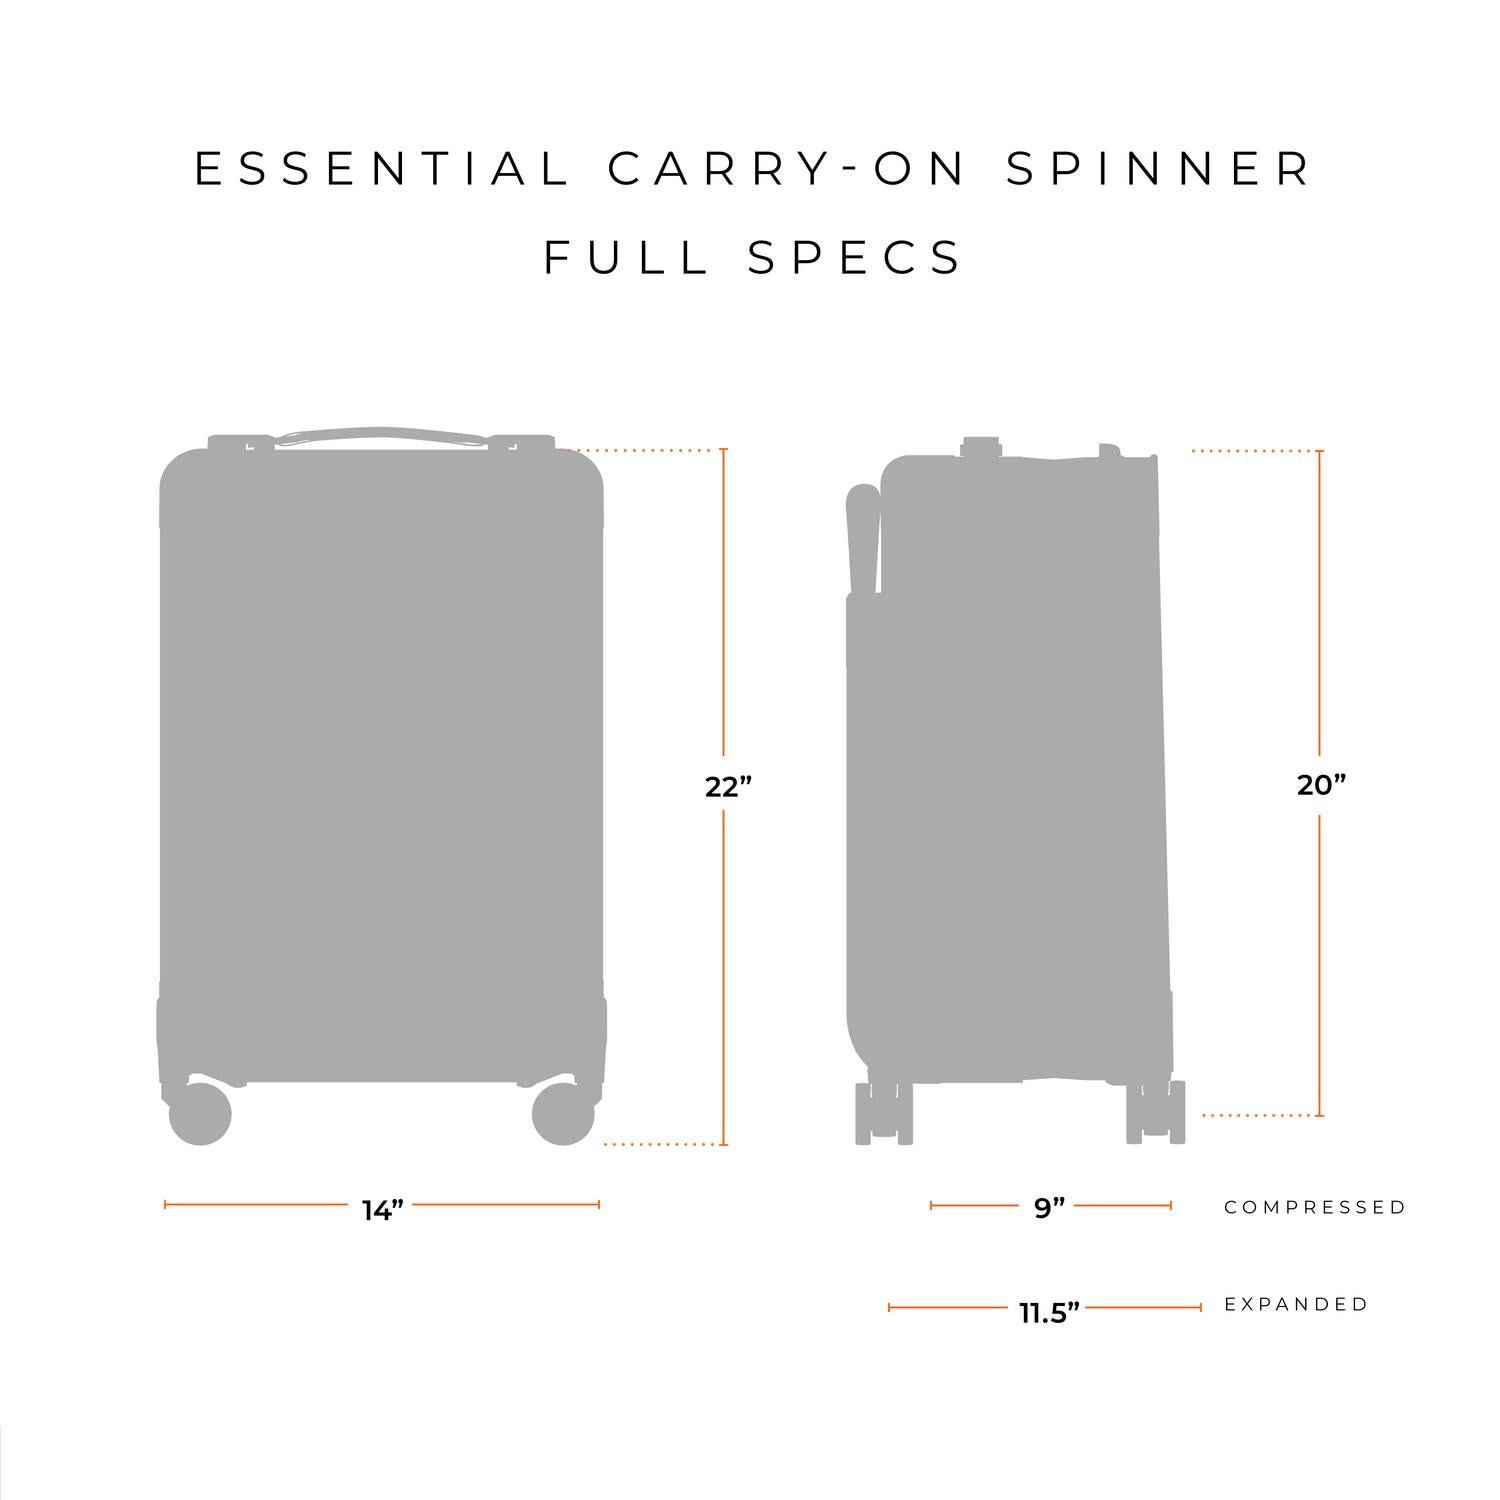 Briggs and Riley Essential Carry-On Spinner Full Specs 14"x22"x9" compressed or 11.5" expanded #color_black